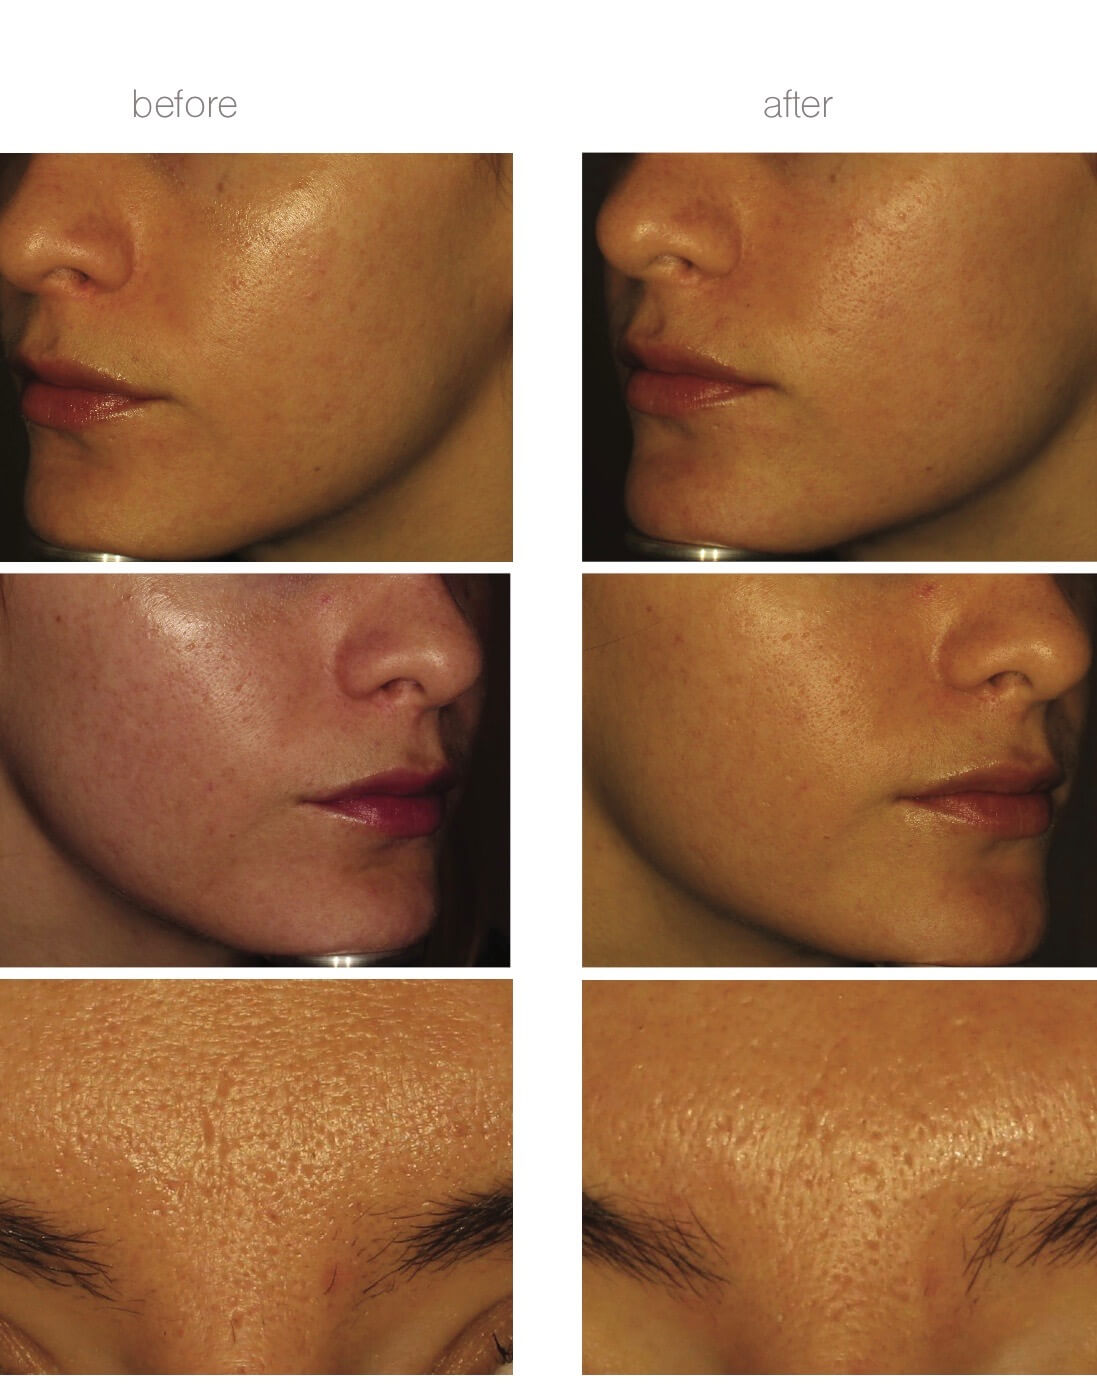 kayla's experience with venus viva skin resurfacing for textural acne scars